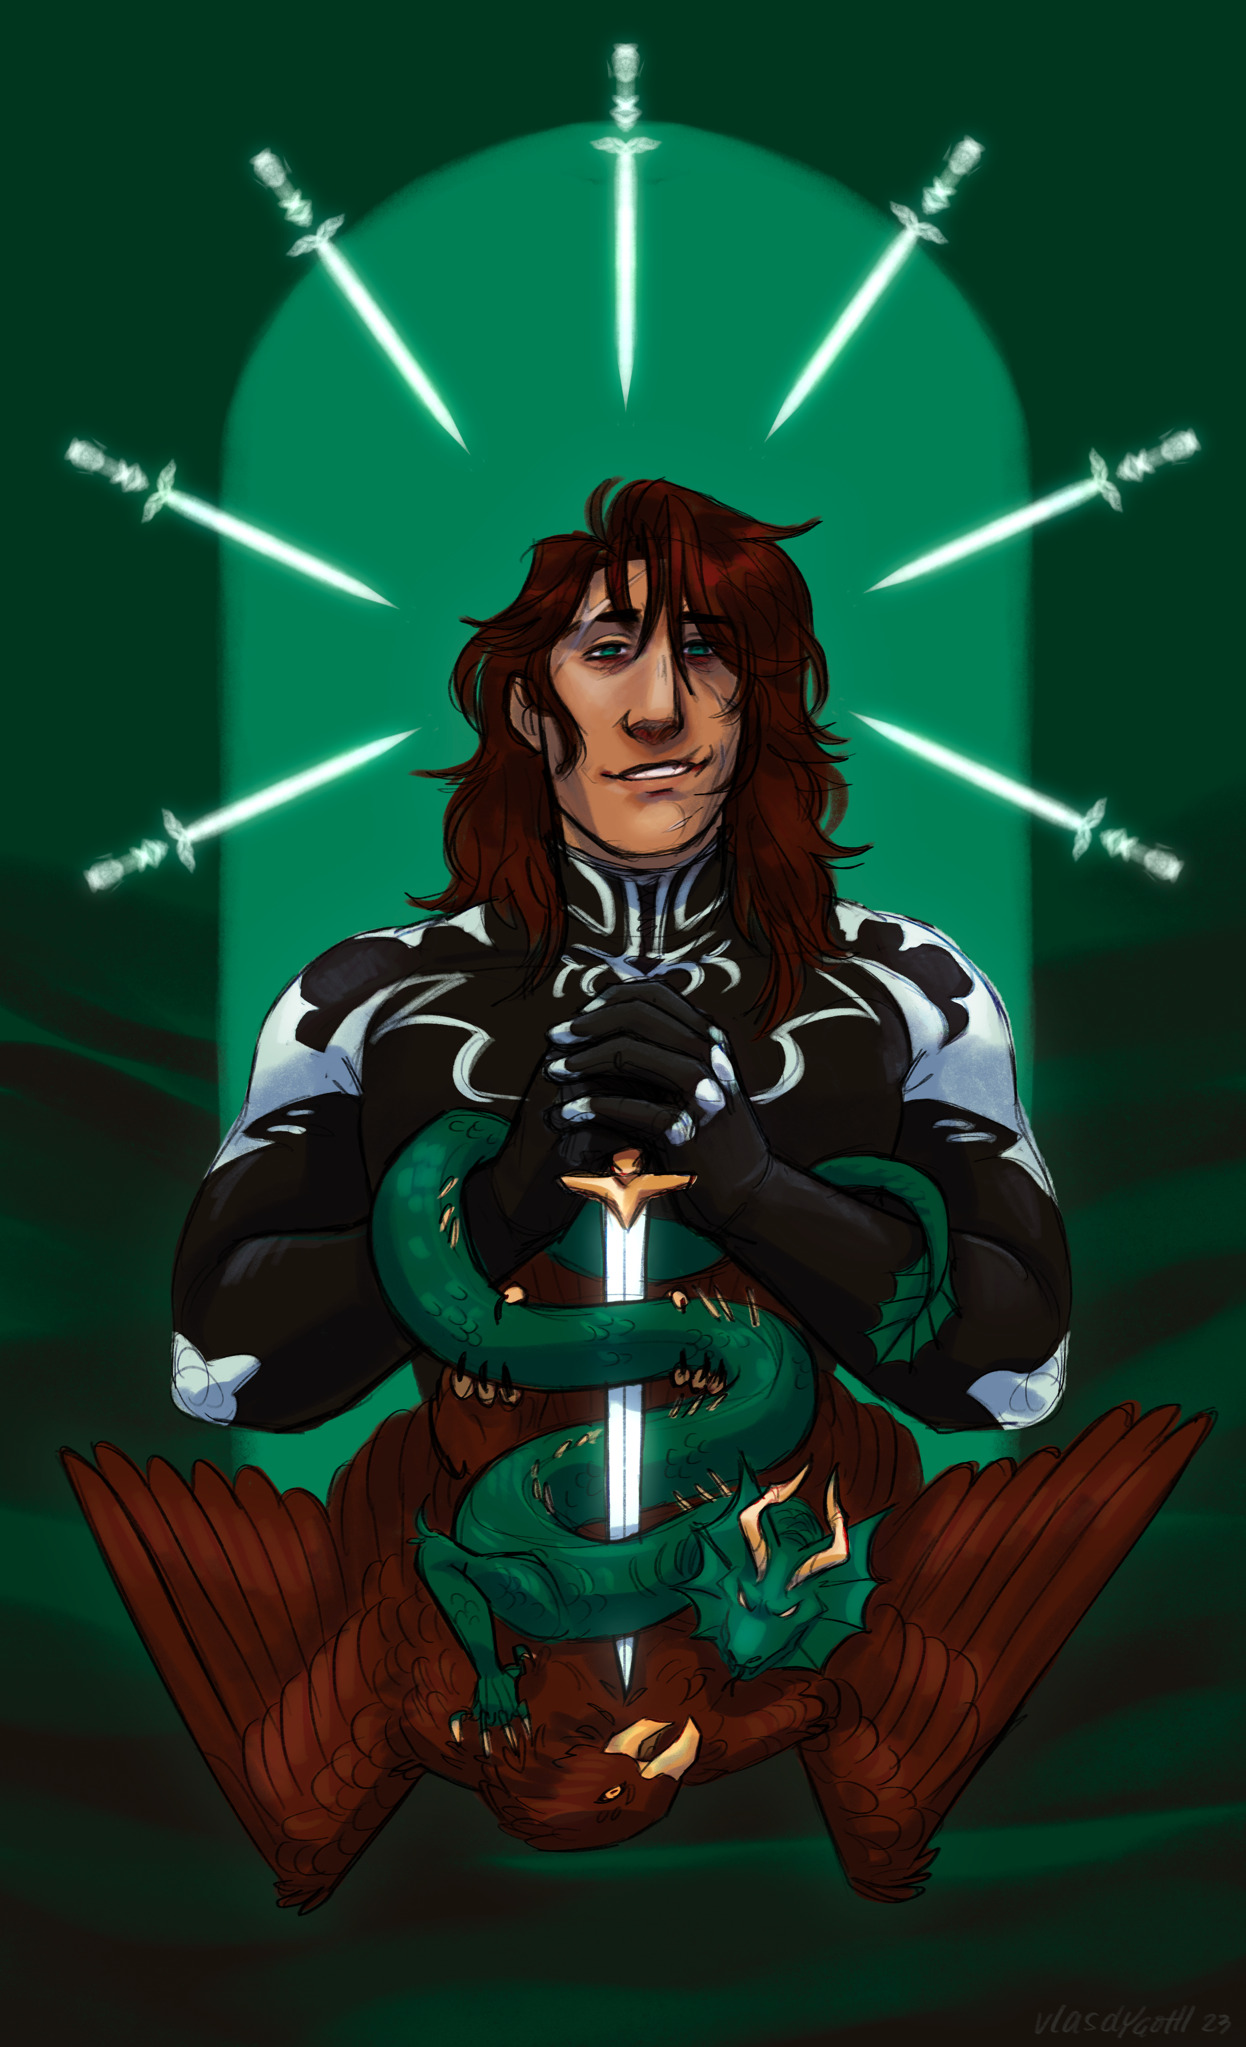 Fanart in the style of a tarot card. Misericorde stabs an eagle with his namesake weapon. A dragon is wrapped around the knife and is caught in the eagle's talons.